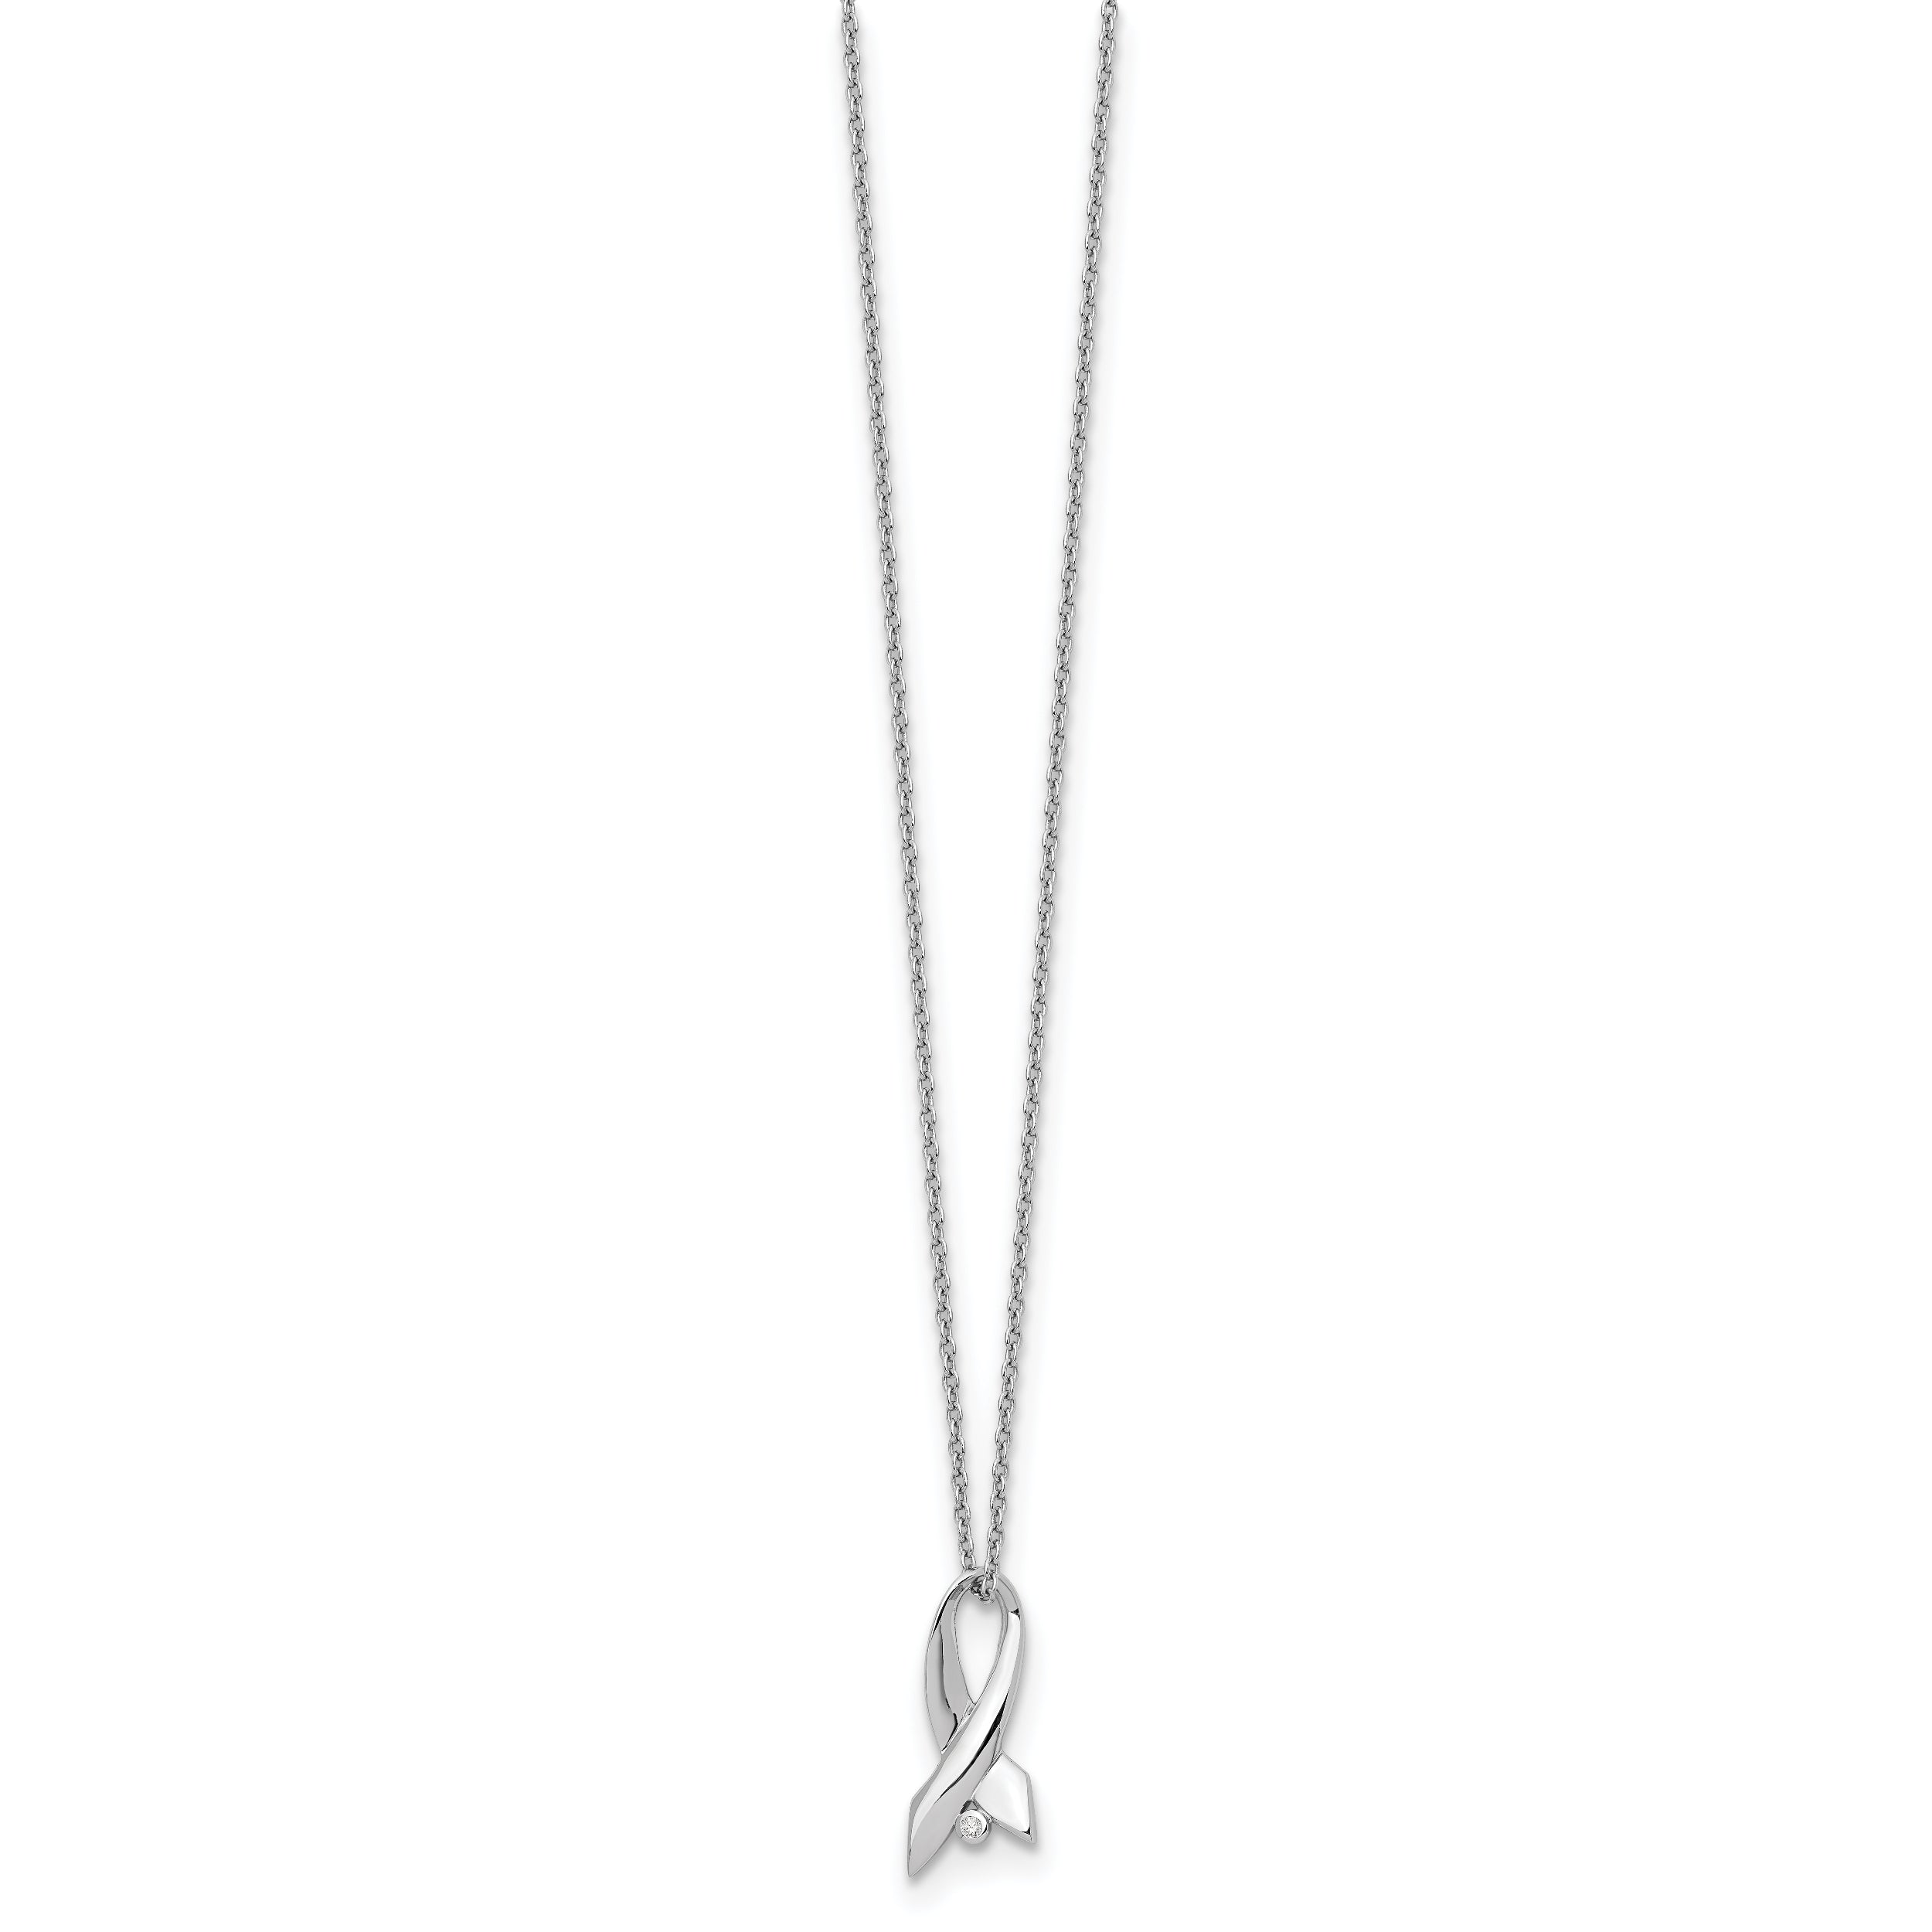 White Ice Sterling Silver Rhodium-plated 18 Inch Diamond Awareness Ribbon Necklace with 2 Inch Extender